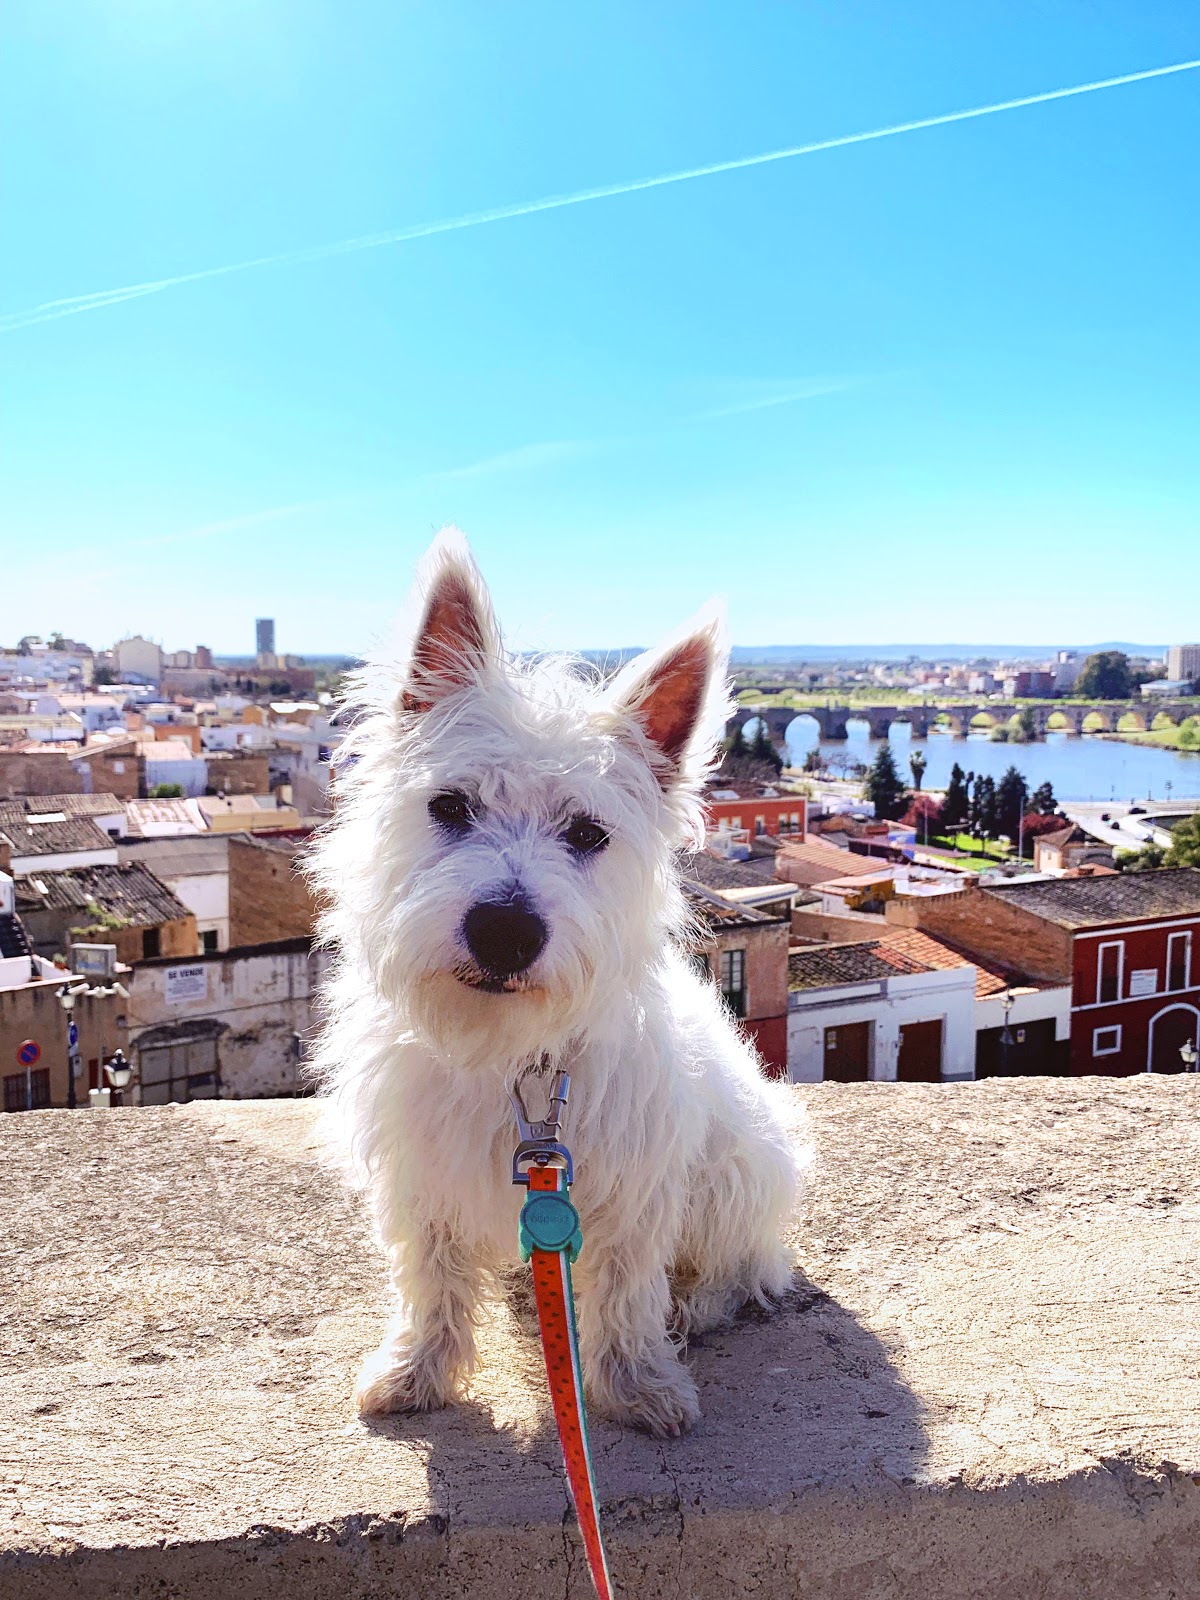 Things I packed on our first trip with our Westie puppy